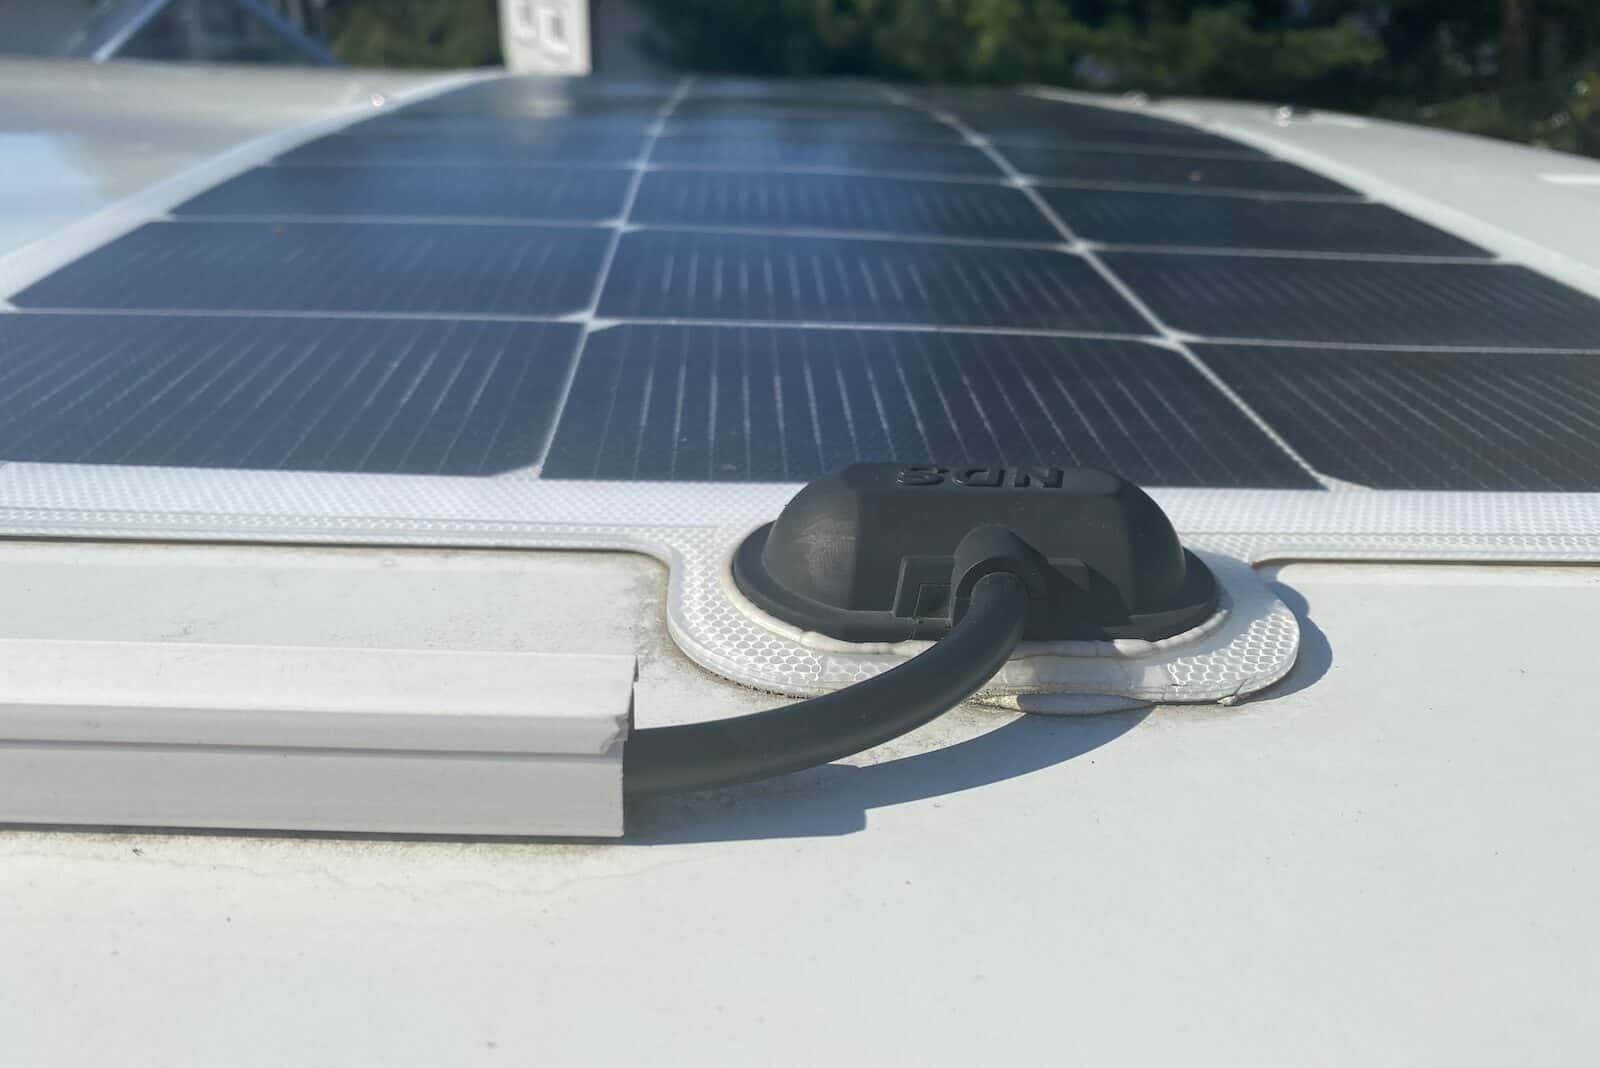 Thin film PV solar panel on the roof